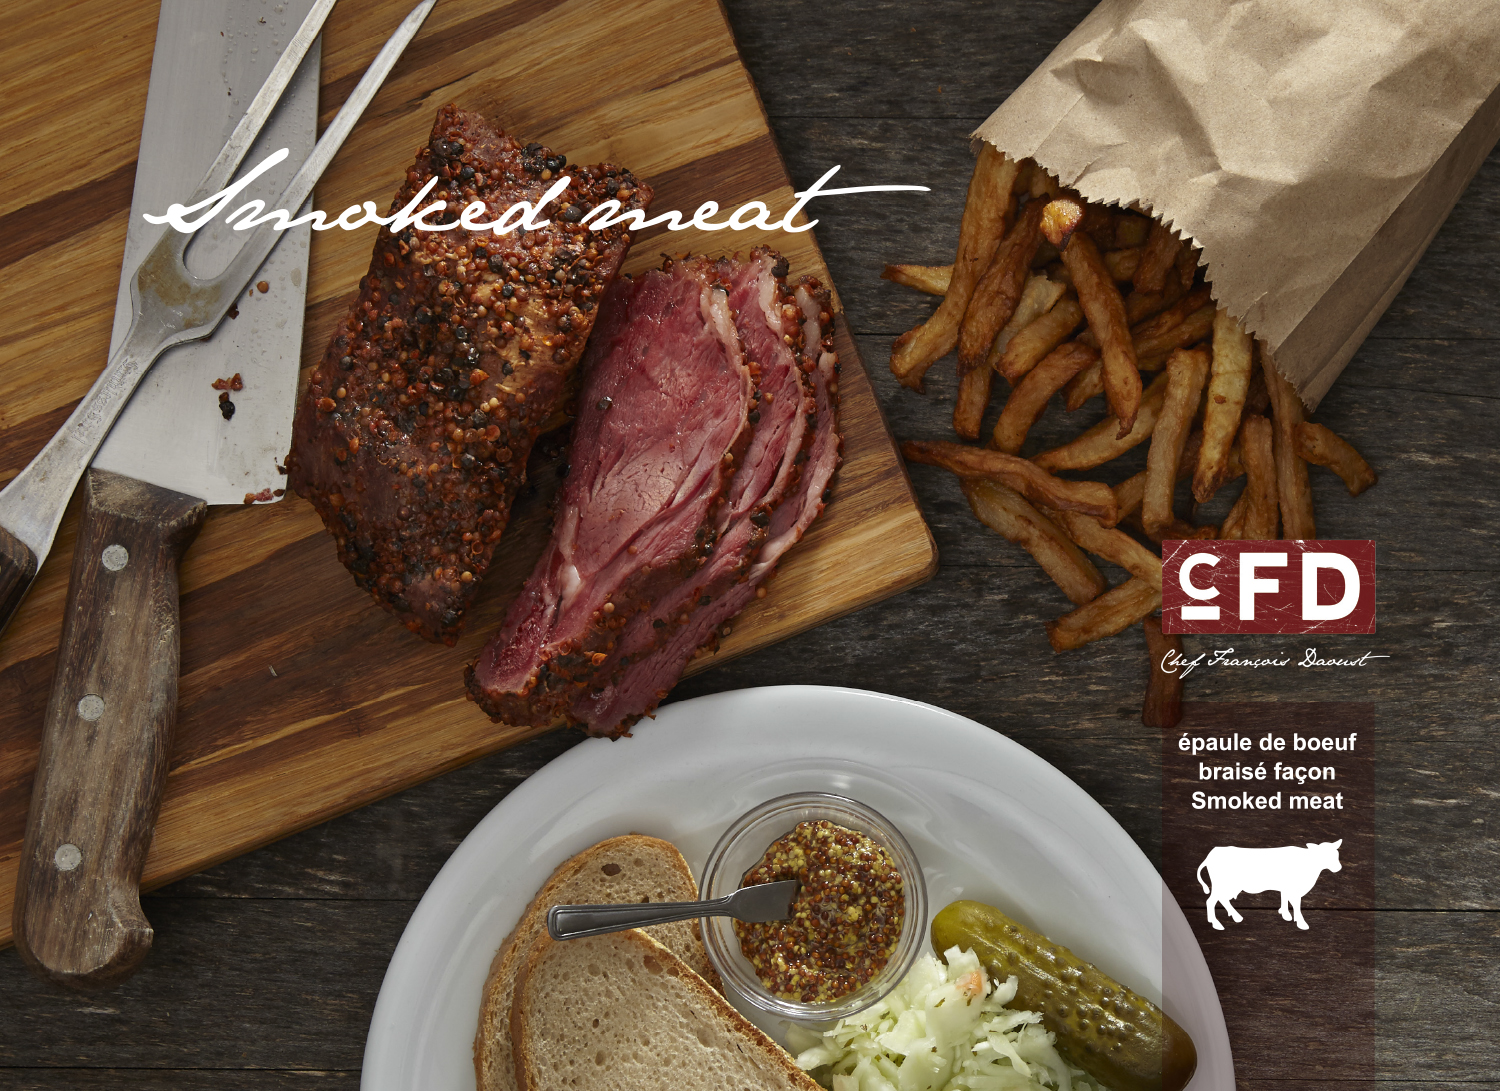 Chef+Francois+Daoust+-epaule+boeuf+smoked+meat.jpg